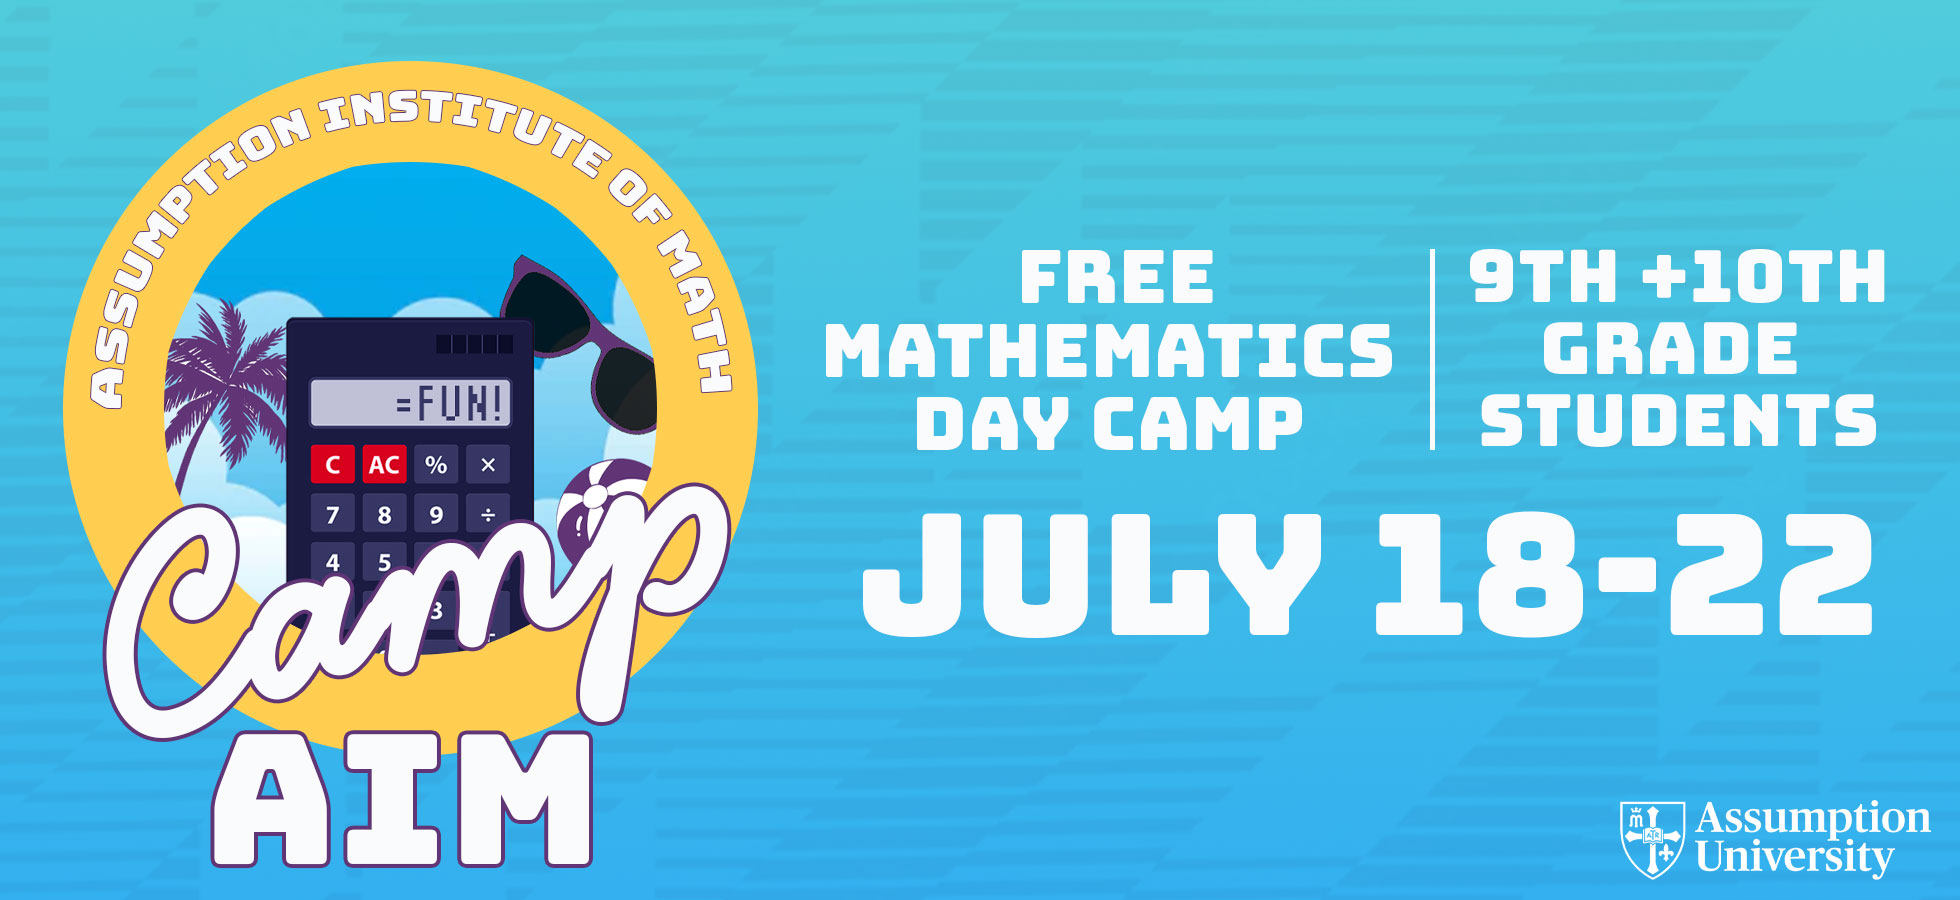 Graphic to promote Assumption University's interactive day camp sponsored by its Institute of Math.